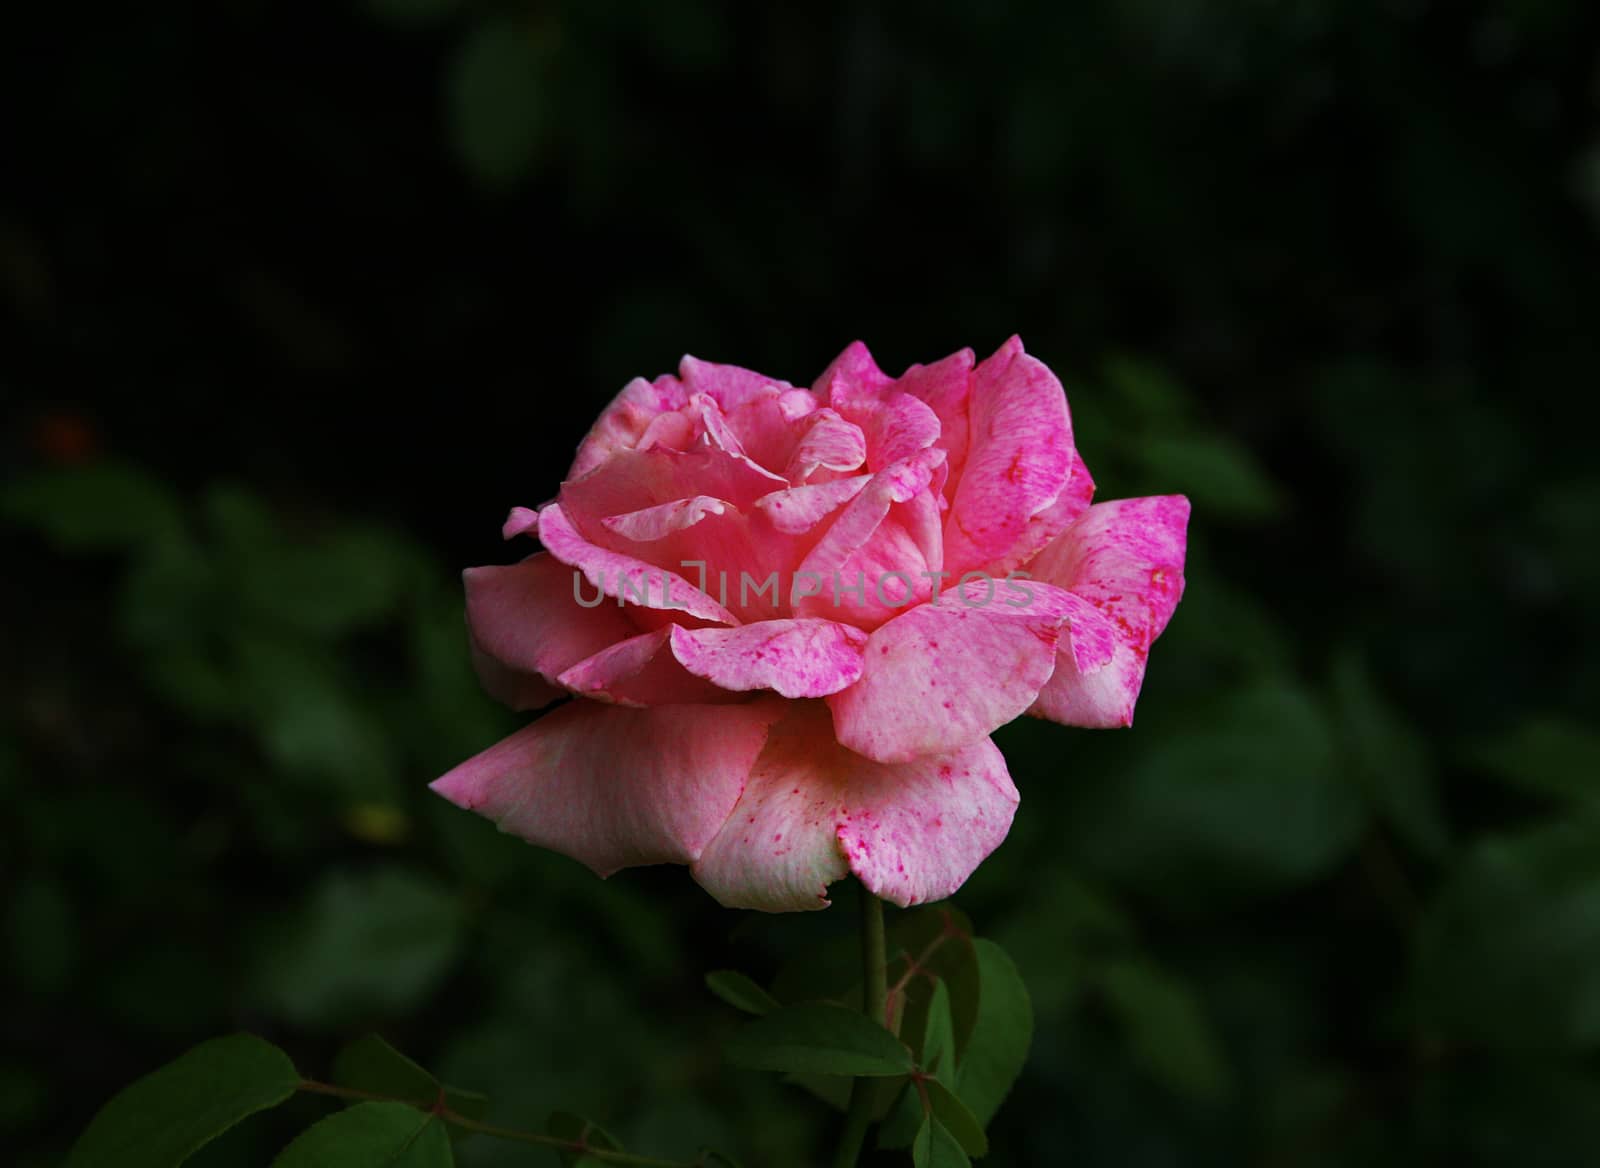 Natural rose on a dark background with green leaves.